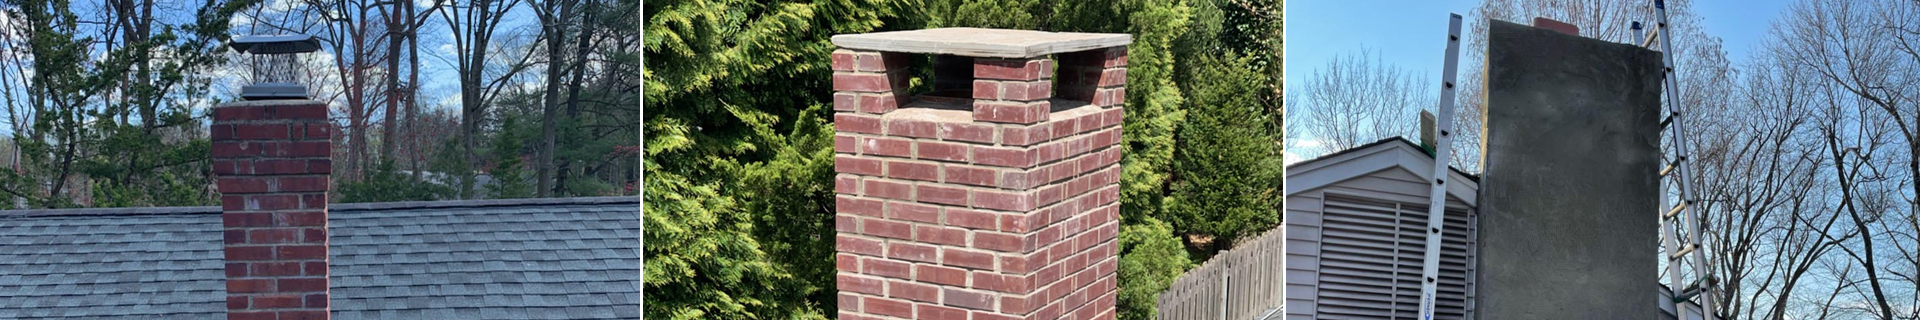 Chimney Repair Service New Jersey